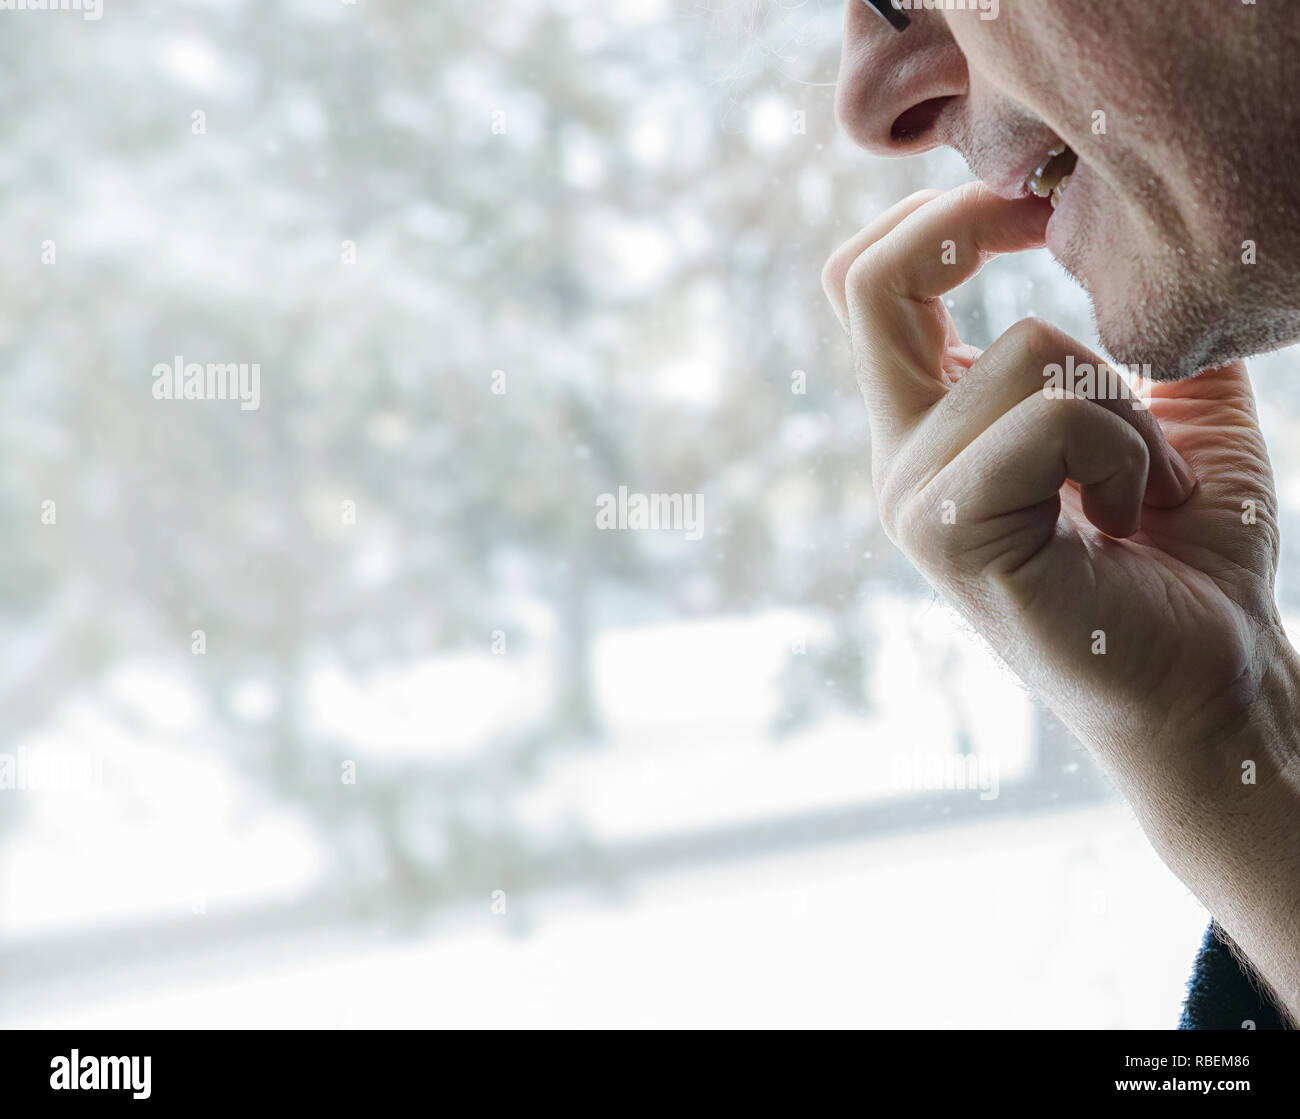 A mature male bites his nails while waiting and looks out the window. Profile view. Stock Photo